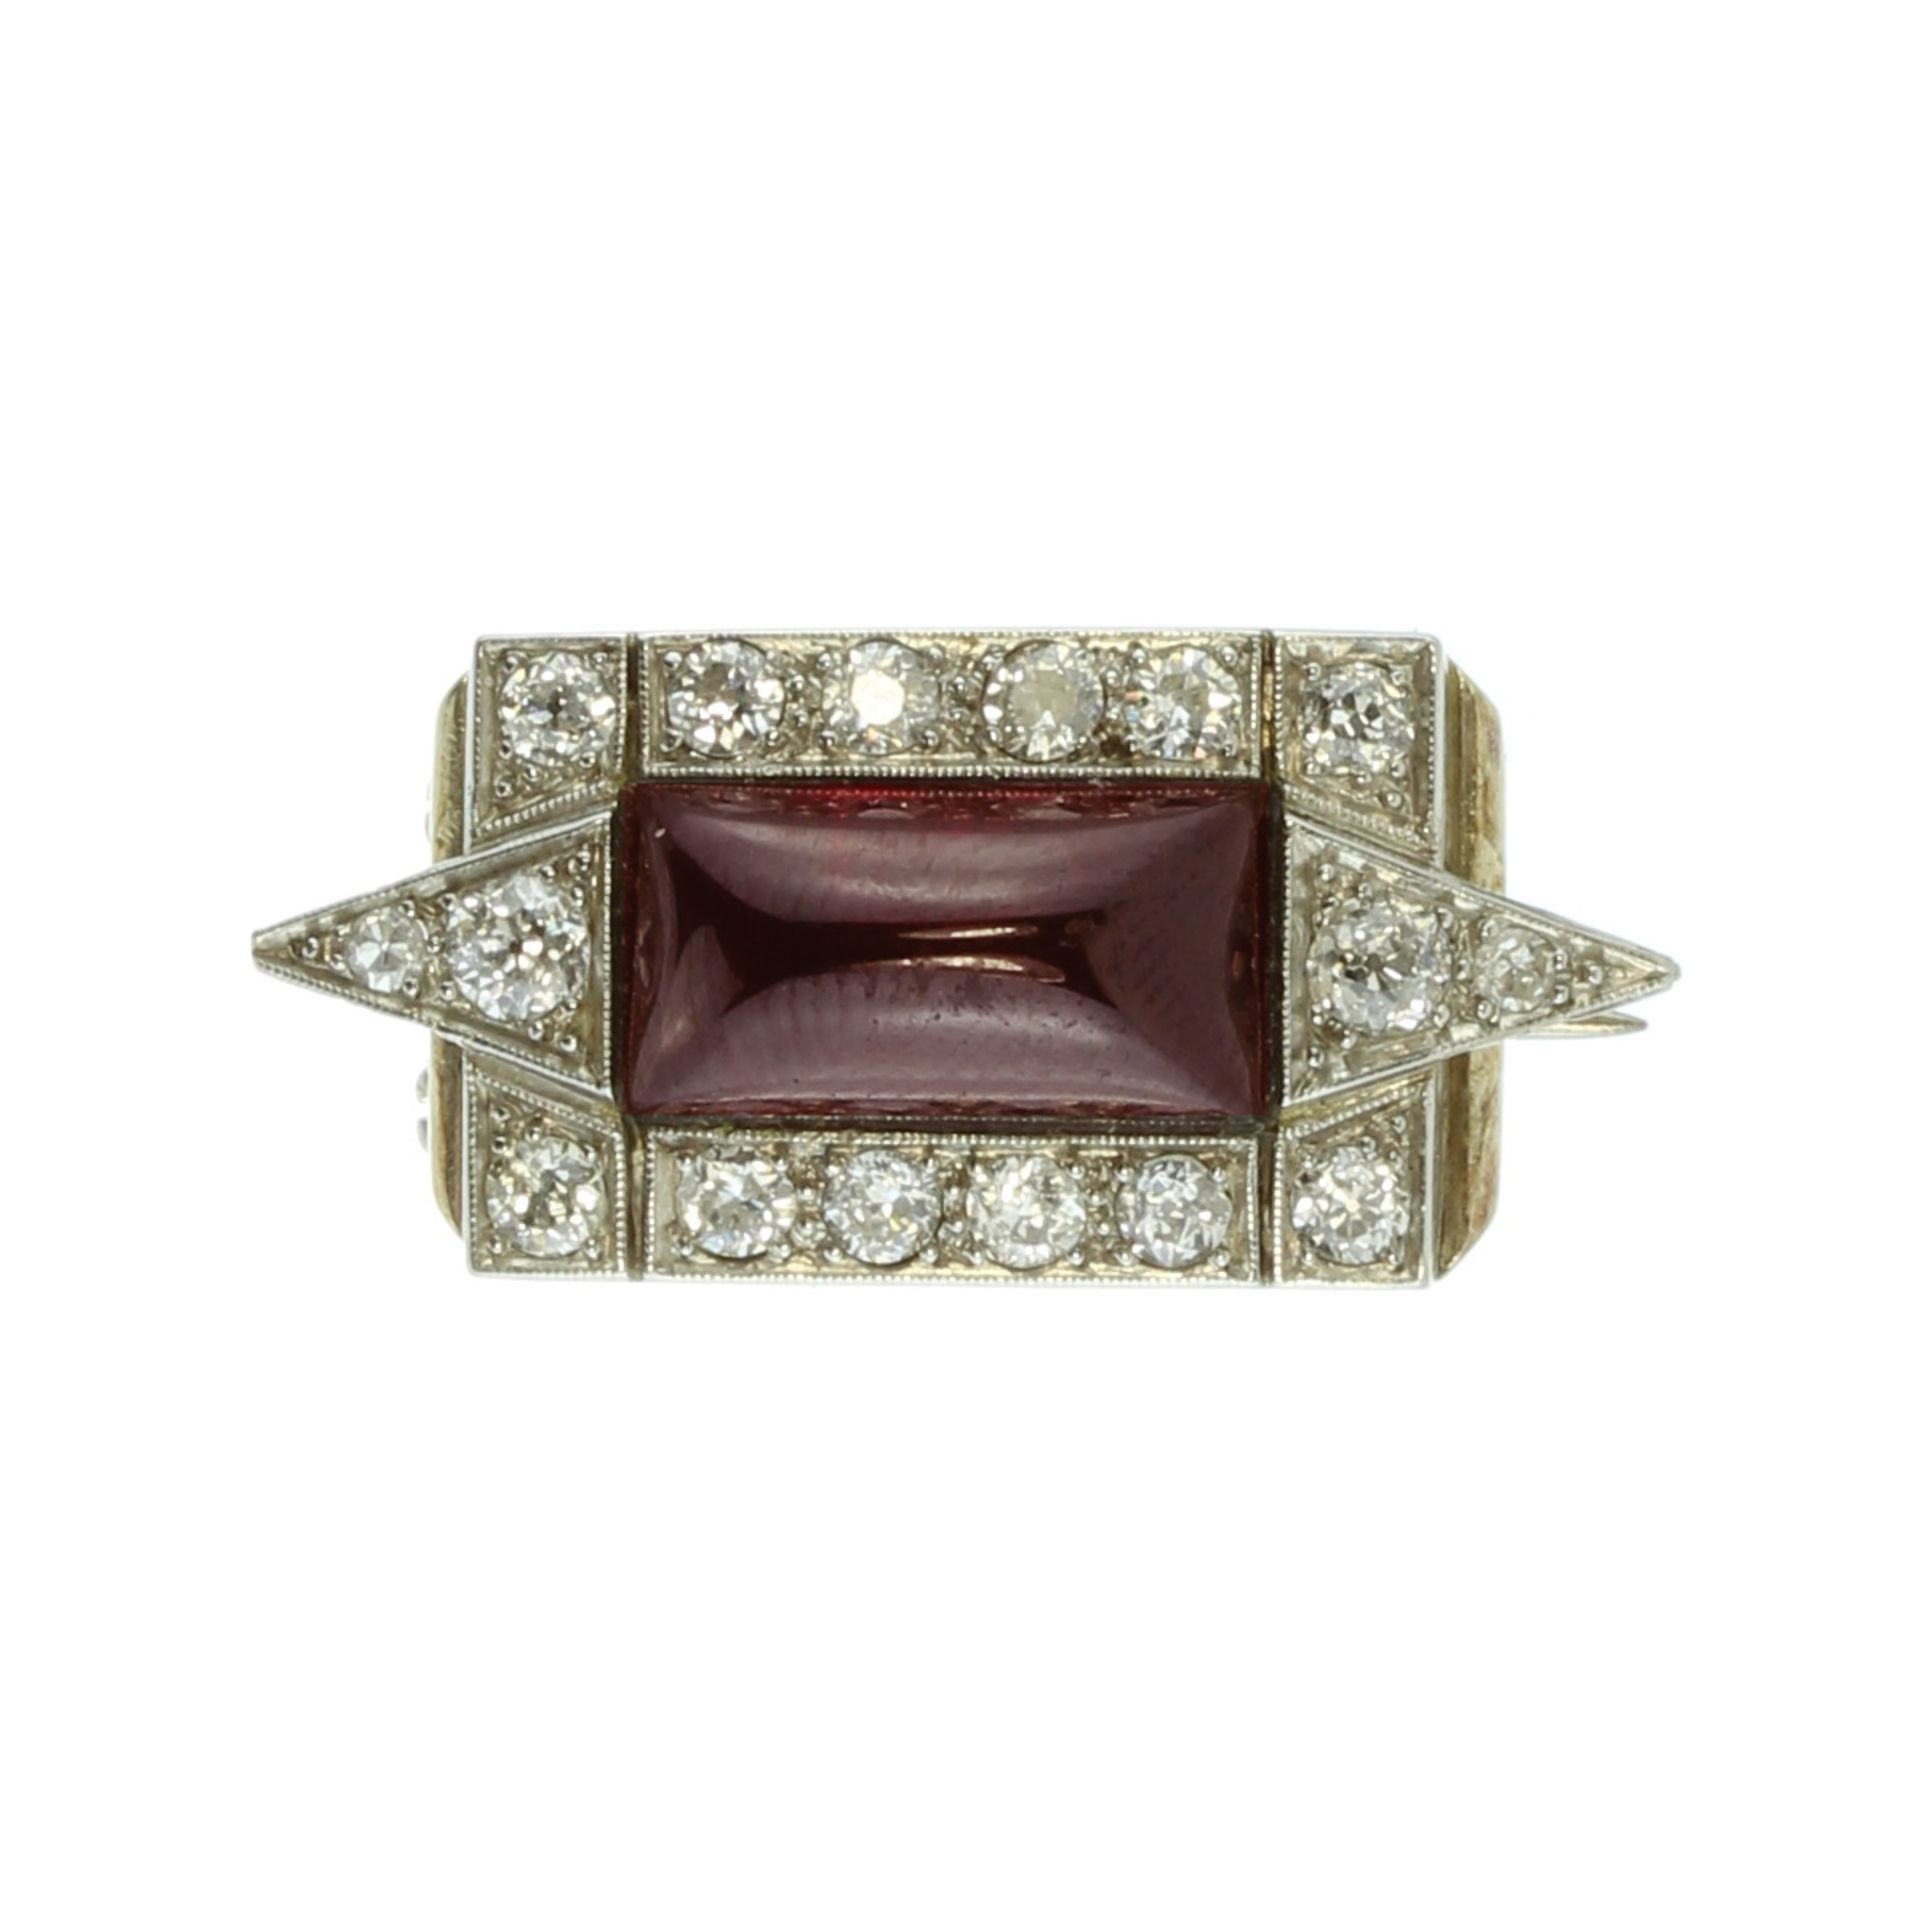 An antique garnet and diamond brooch in silver and high carat yellow gold set with a large,